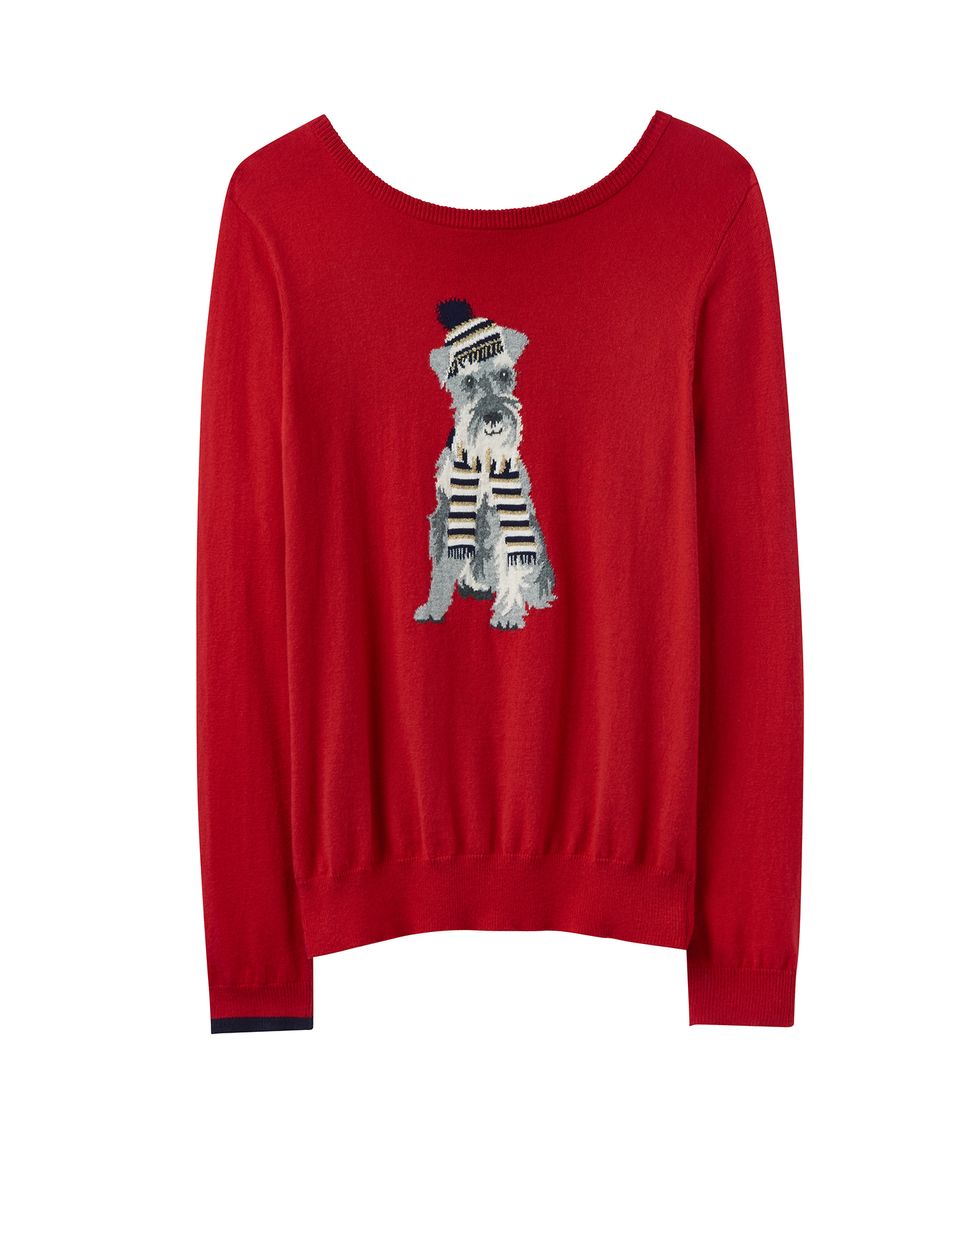 Clothing, Sleeve, Red, T-shirt, Long-sleeved t-shirt, Outerwear, Top, Jersey, Blouse, Crop top, 